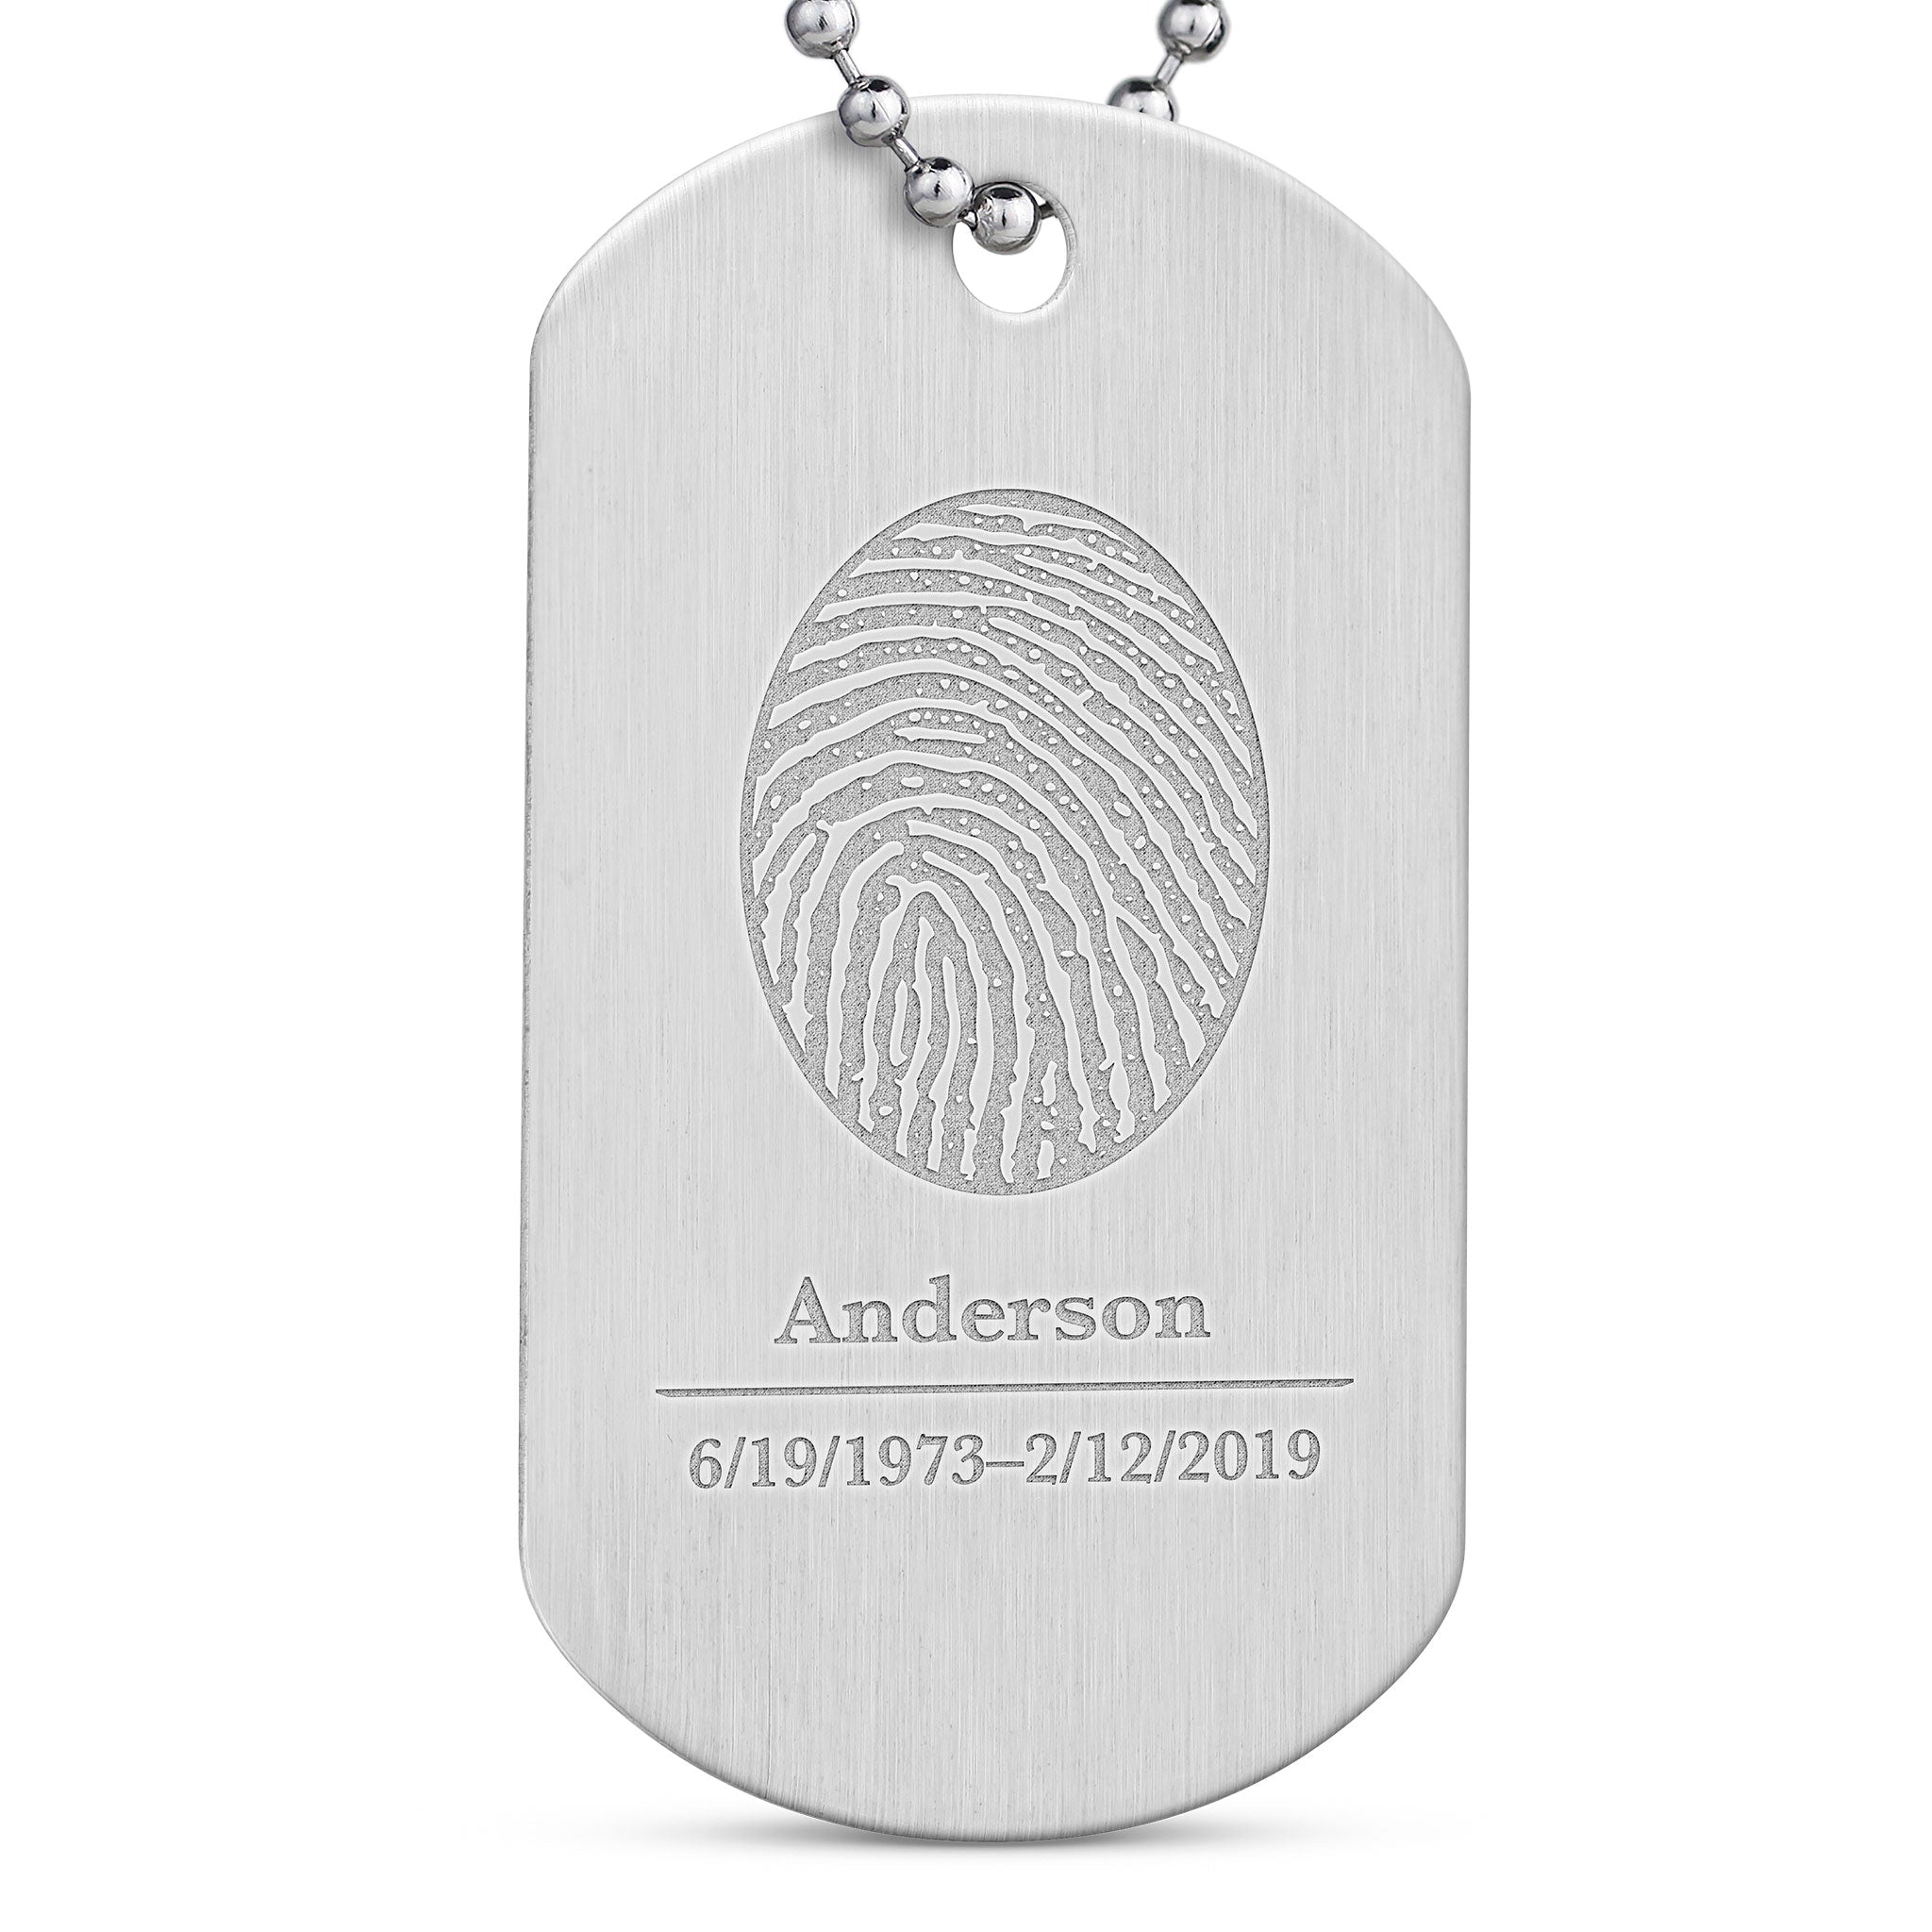 Stainless Steel Military Dog Tag Set Halloween Costume